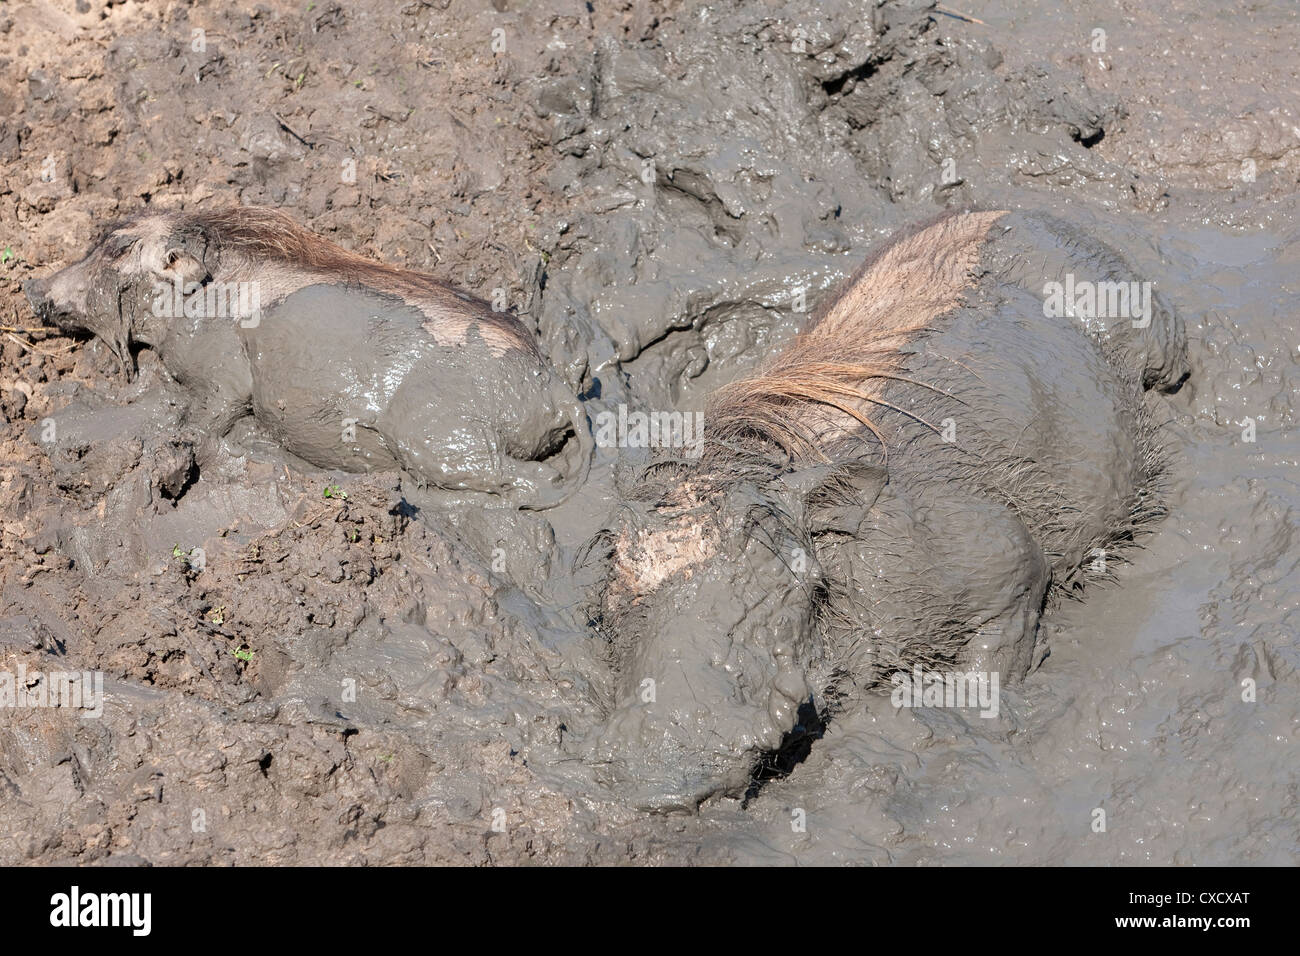 Warthog (Phacochoerus aethiopicus) wallowing, Mkhuze Game Reserve, South Africa, Africa Stock Photo